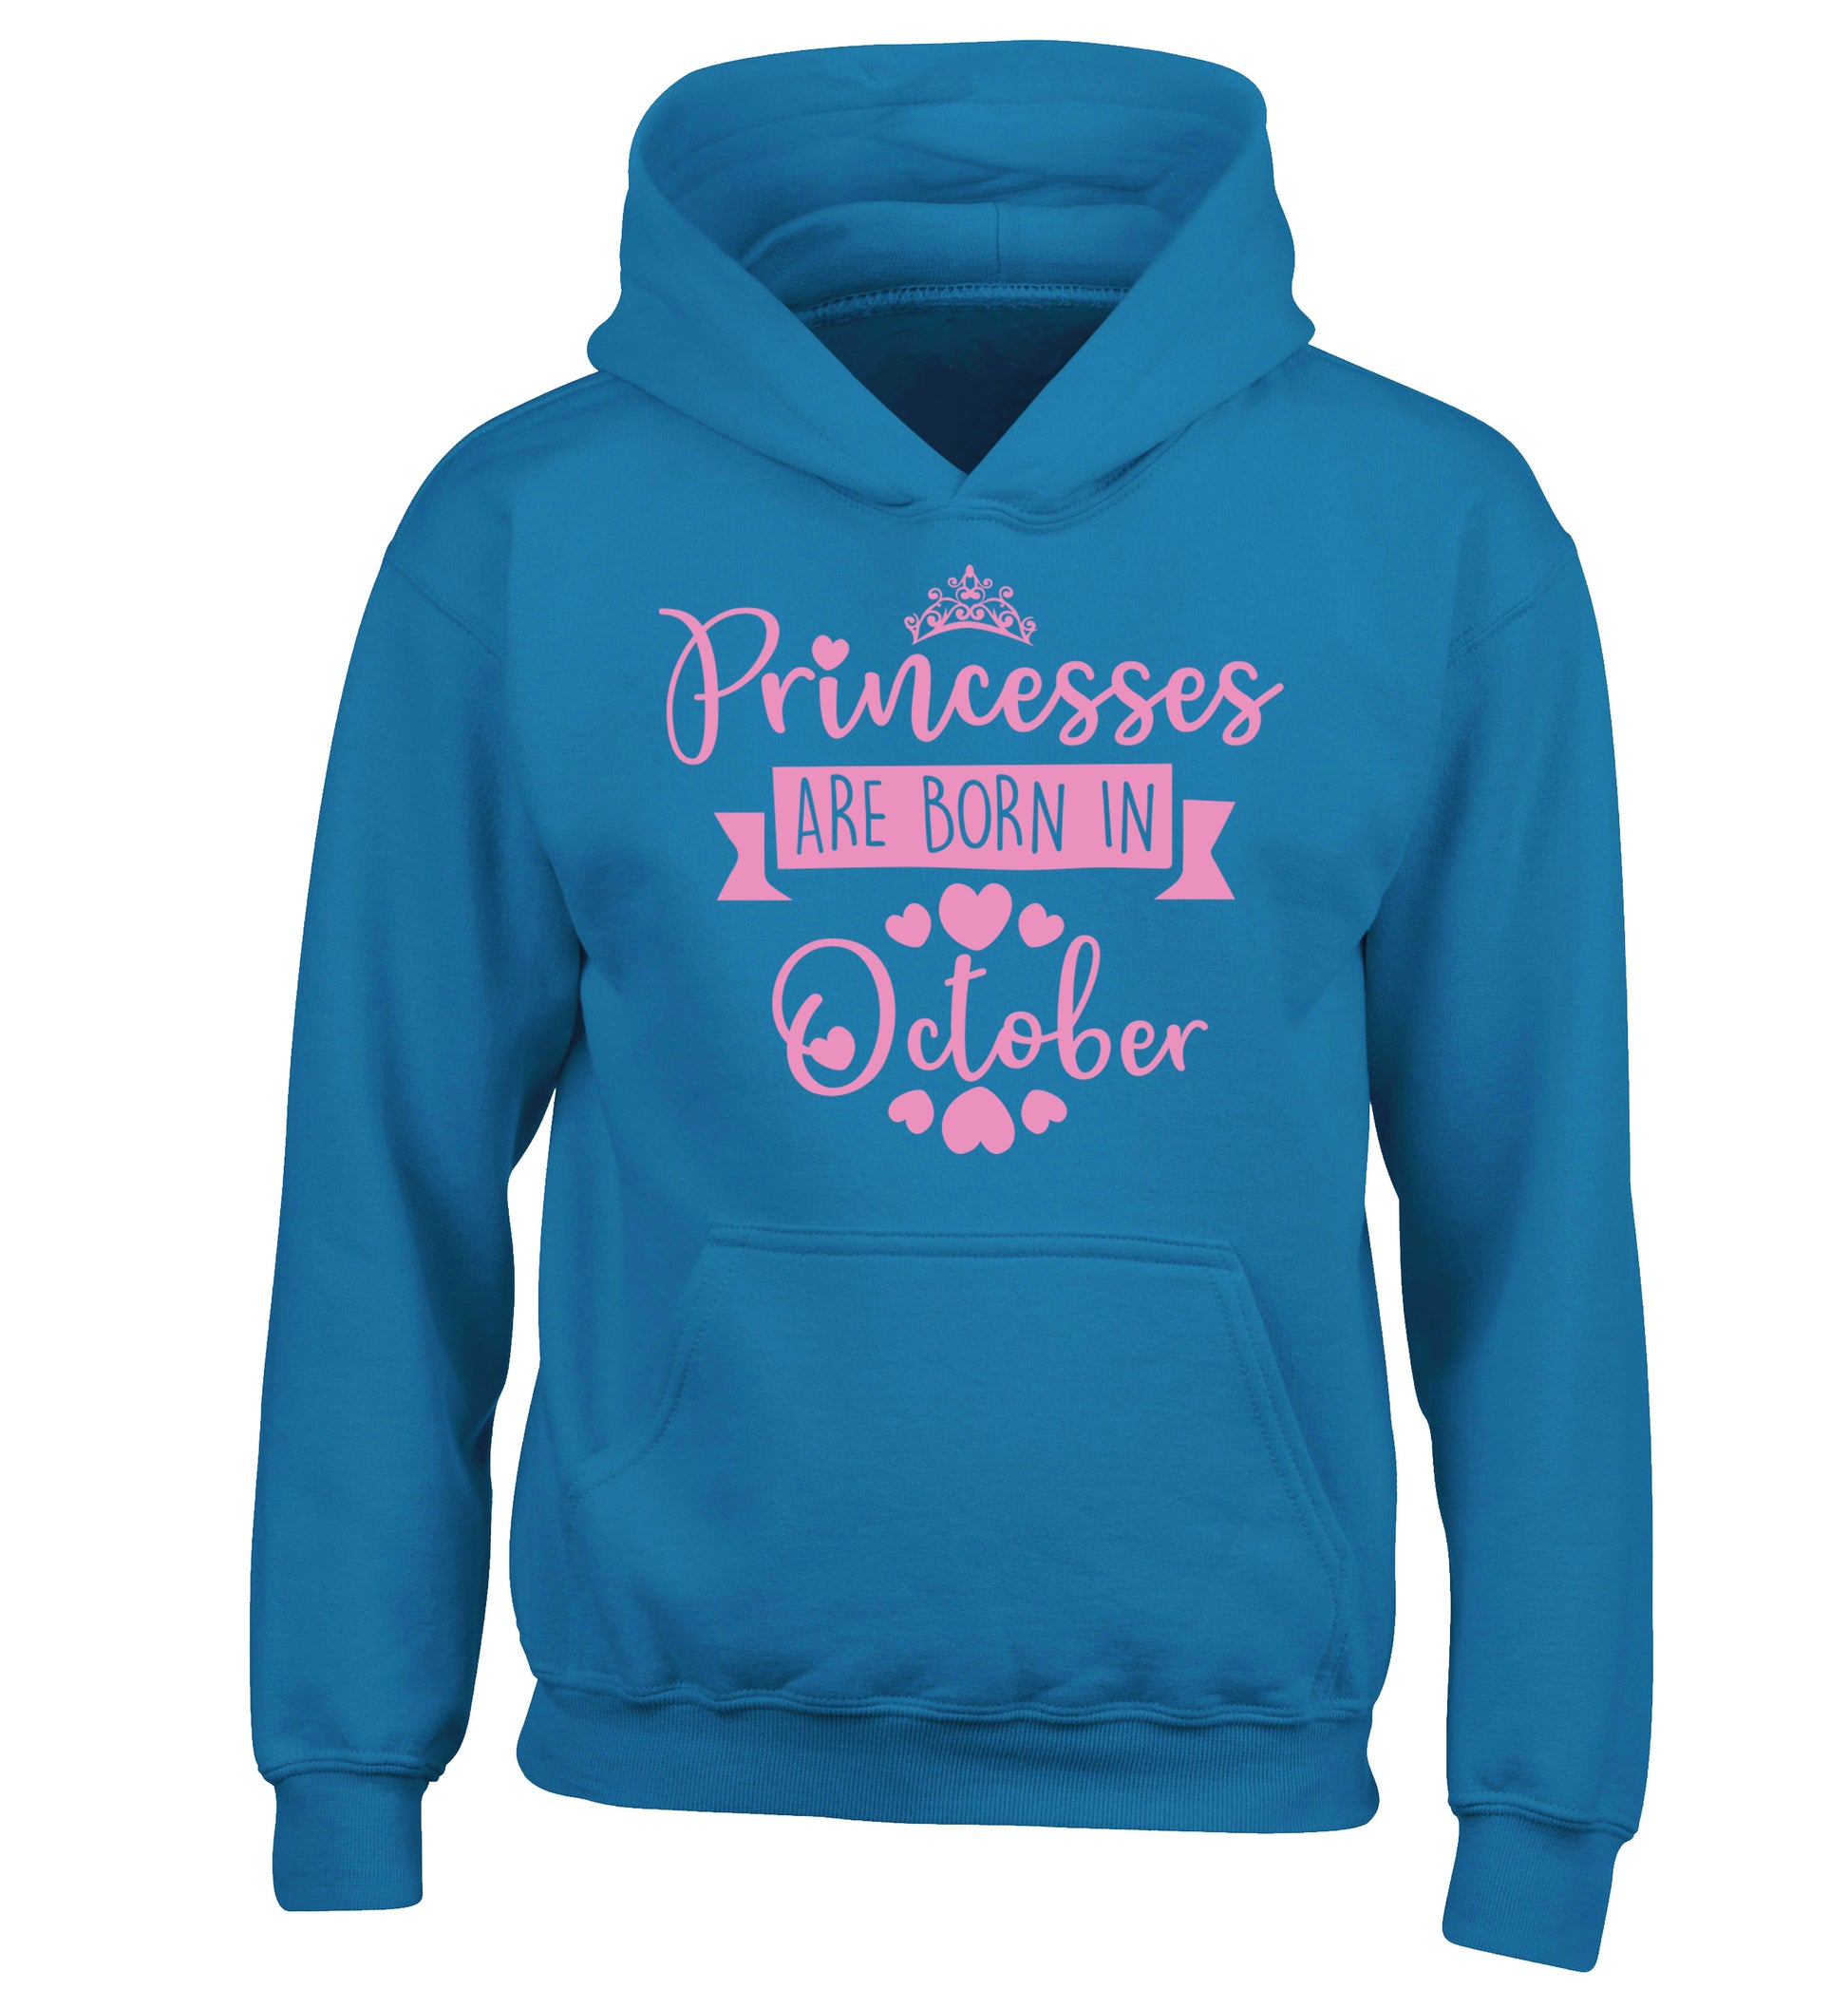 Princesses are born in October children's blue hoodie 12-13 Years